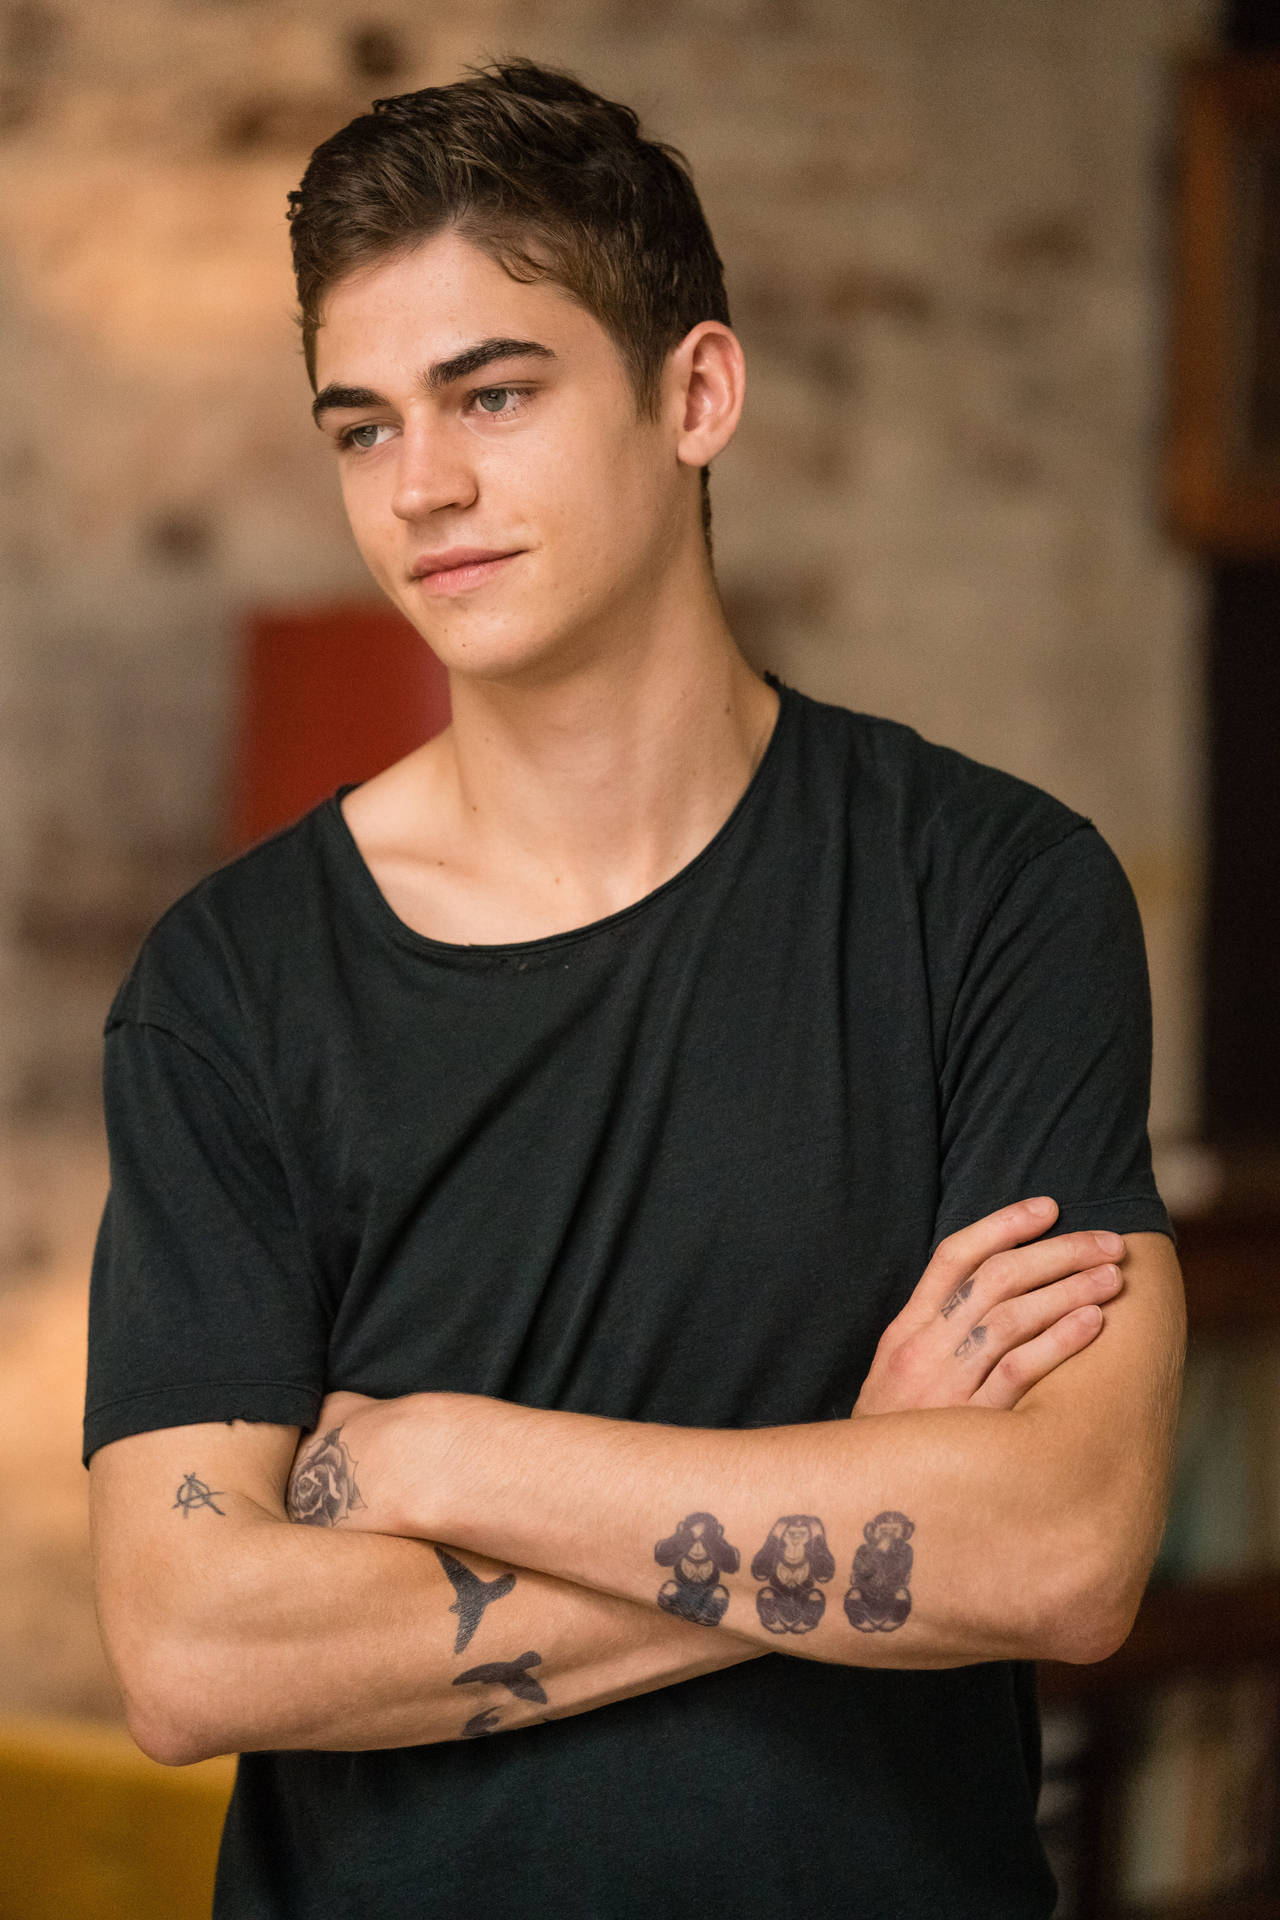 Hardin Scott from the movie "After" in a contemplative scene. Wallpaper